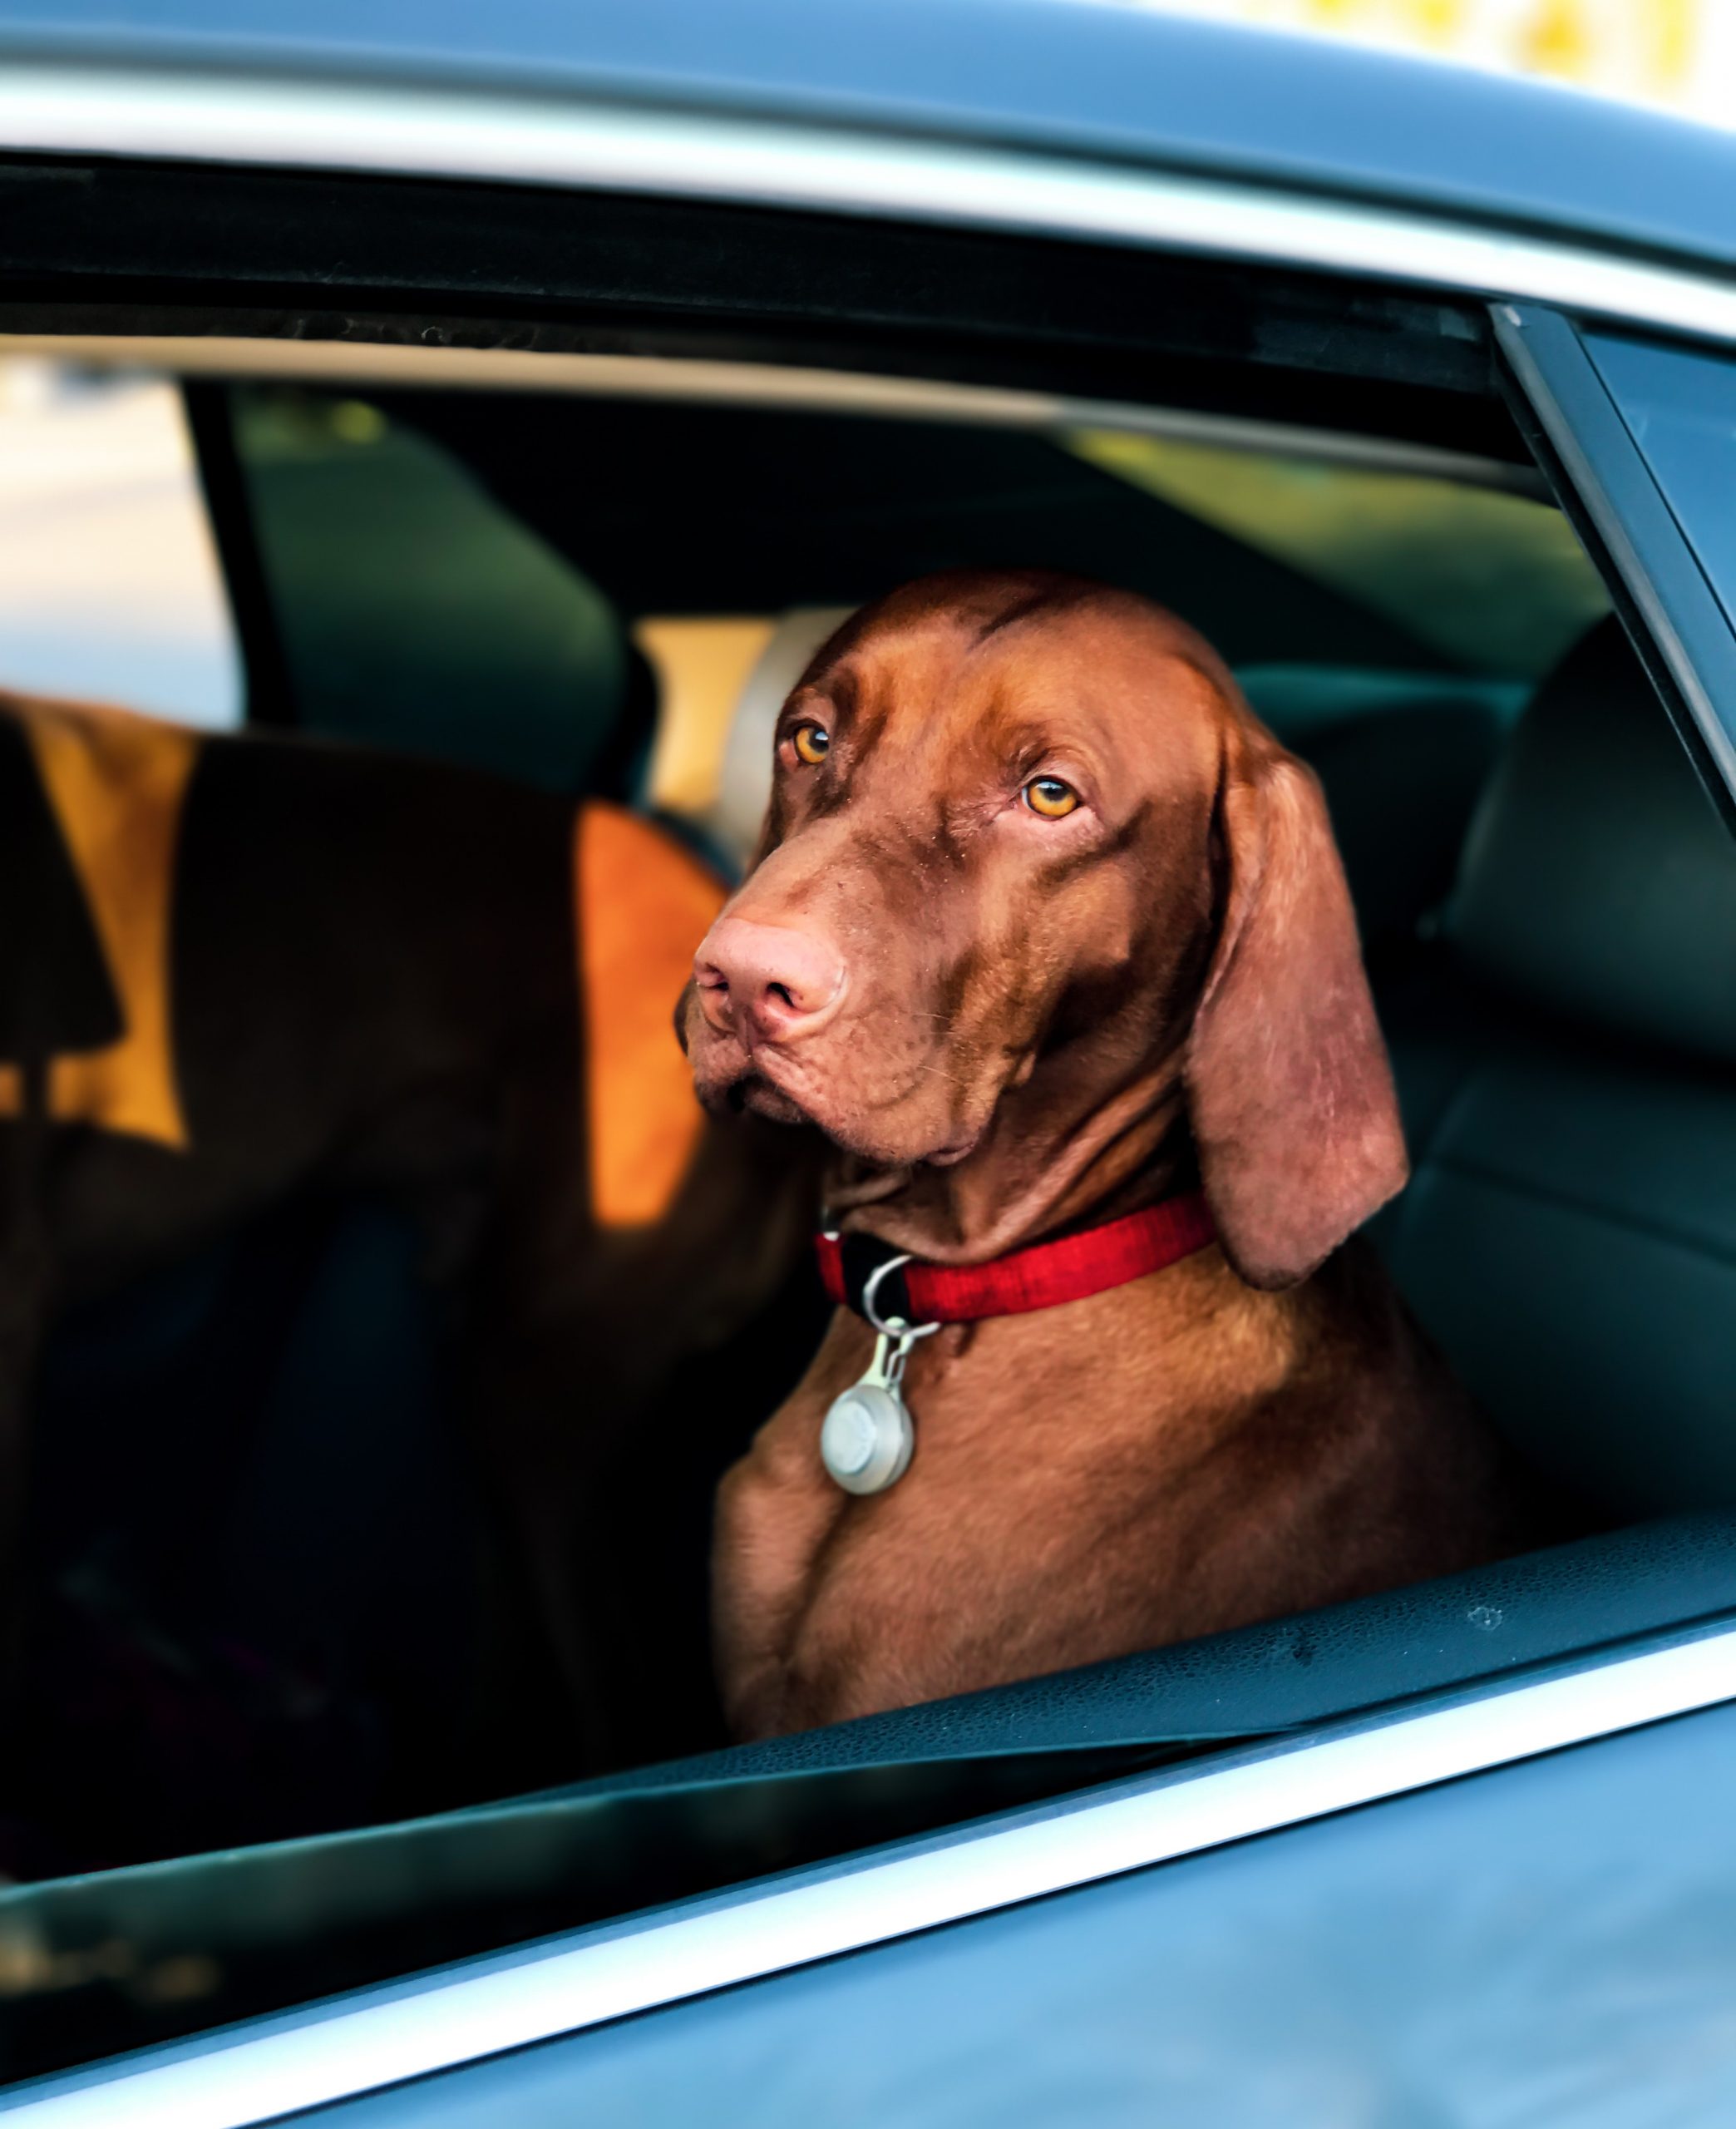 Driving with pets | road safety | driving tips